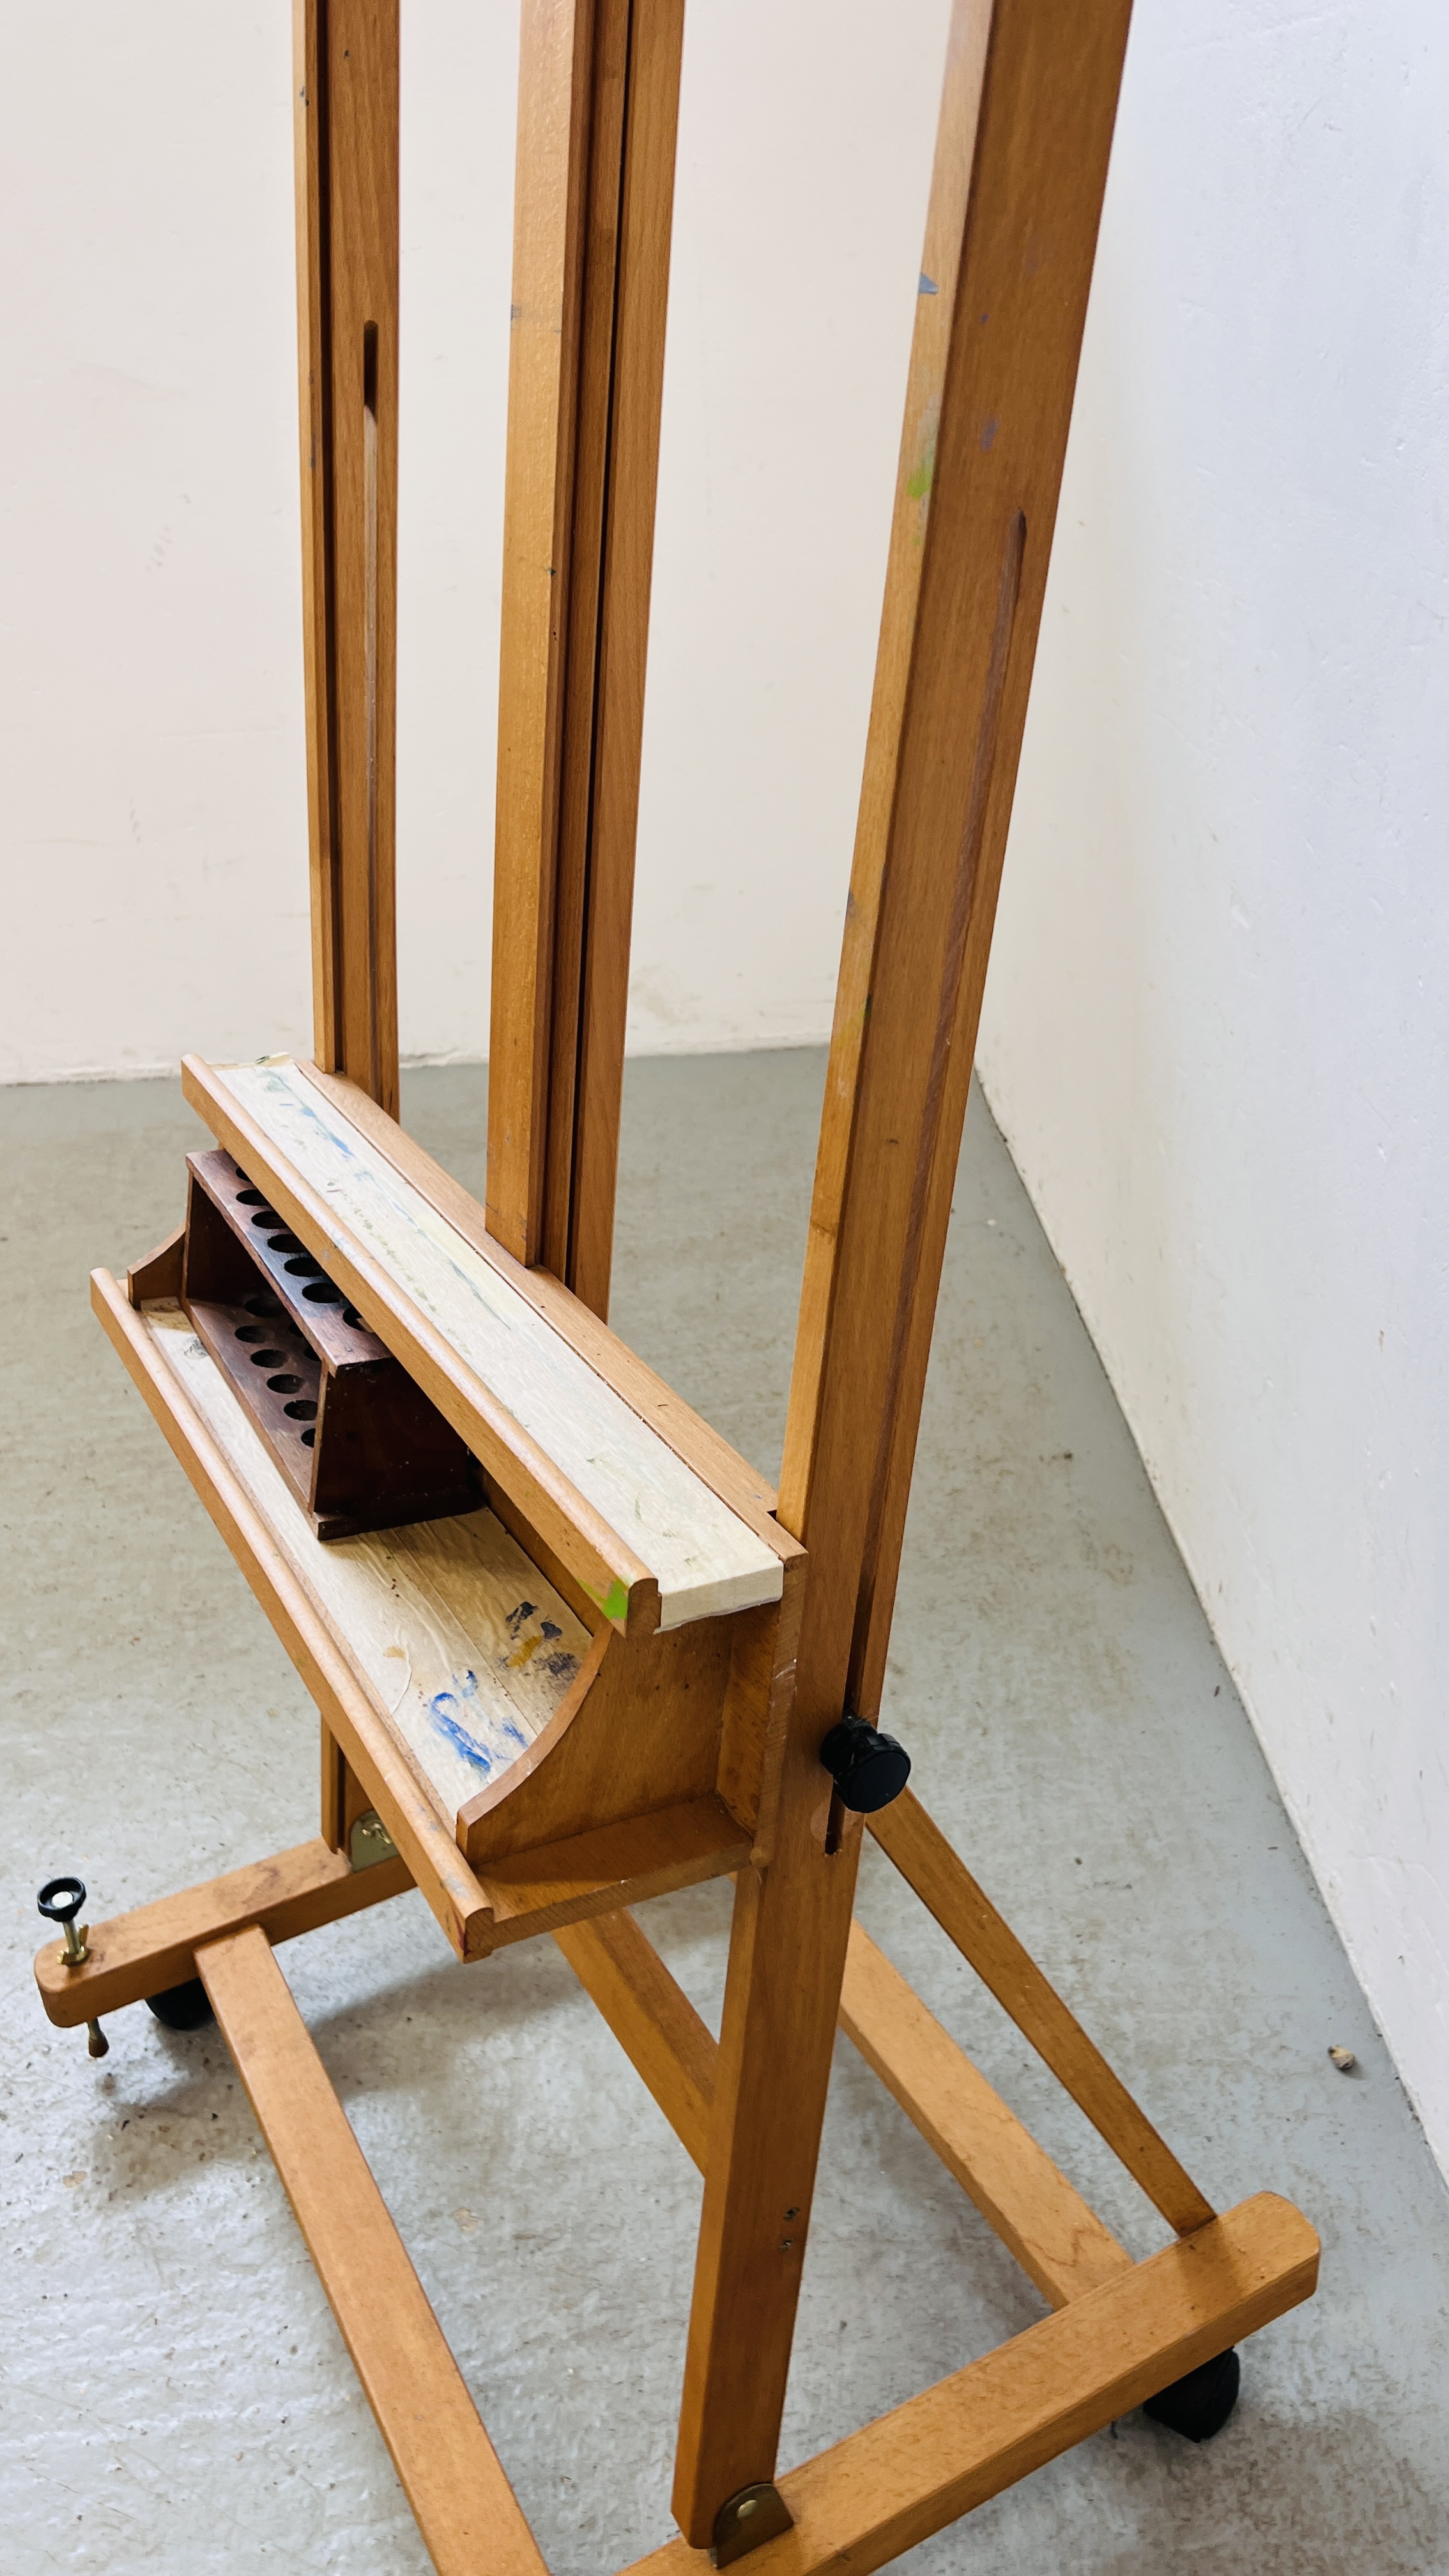 A WINDSOR AND NEWTON LARGE ARTISTS EASEL WITH ADJUSTABLE SHELF AND REVOLVING STOOL - Image 6 of 7